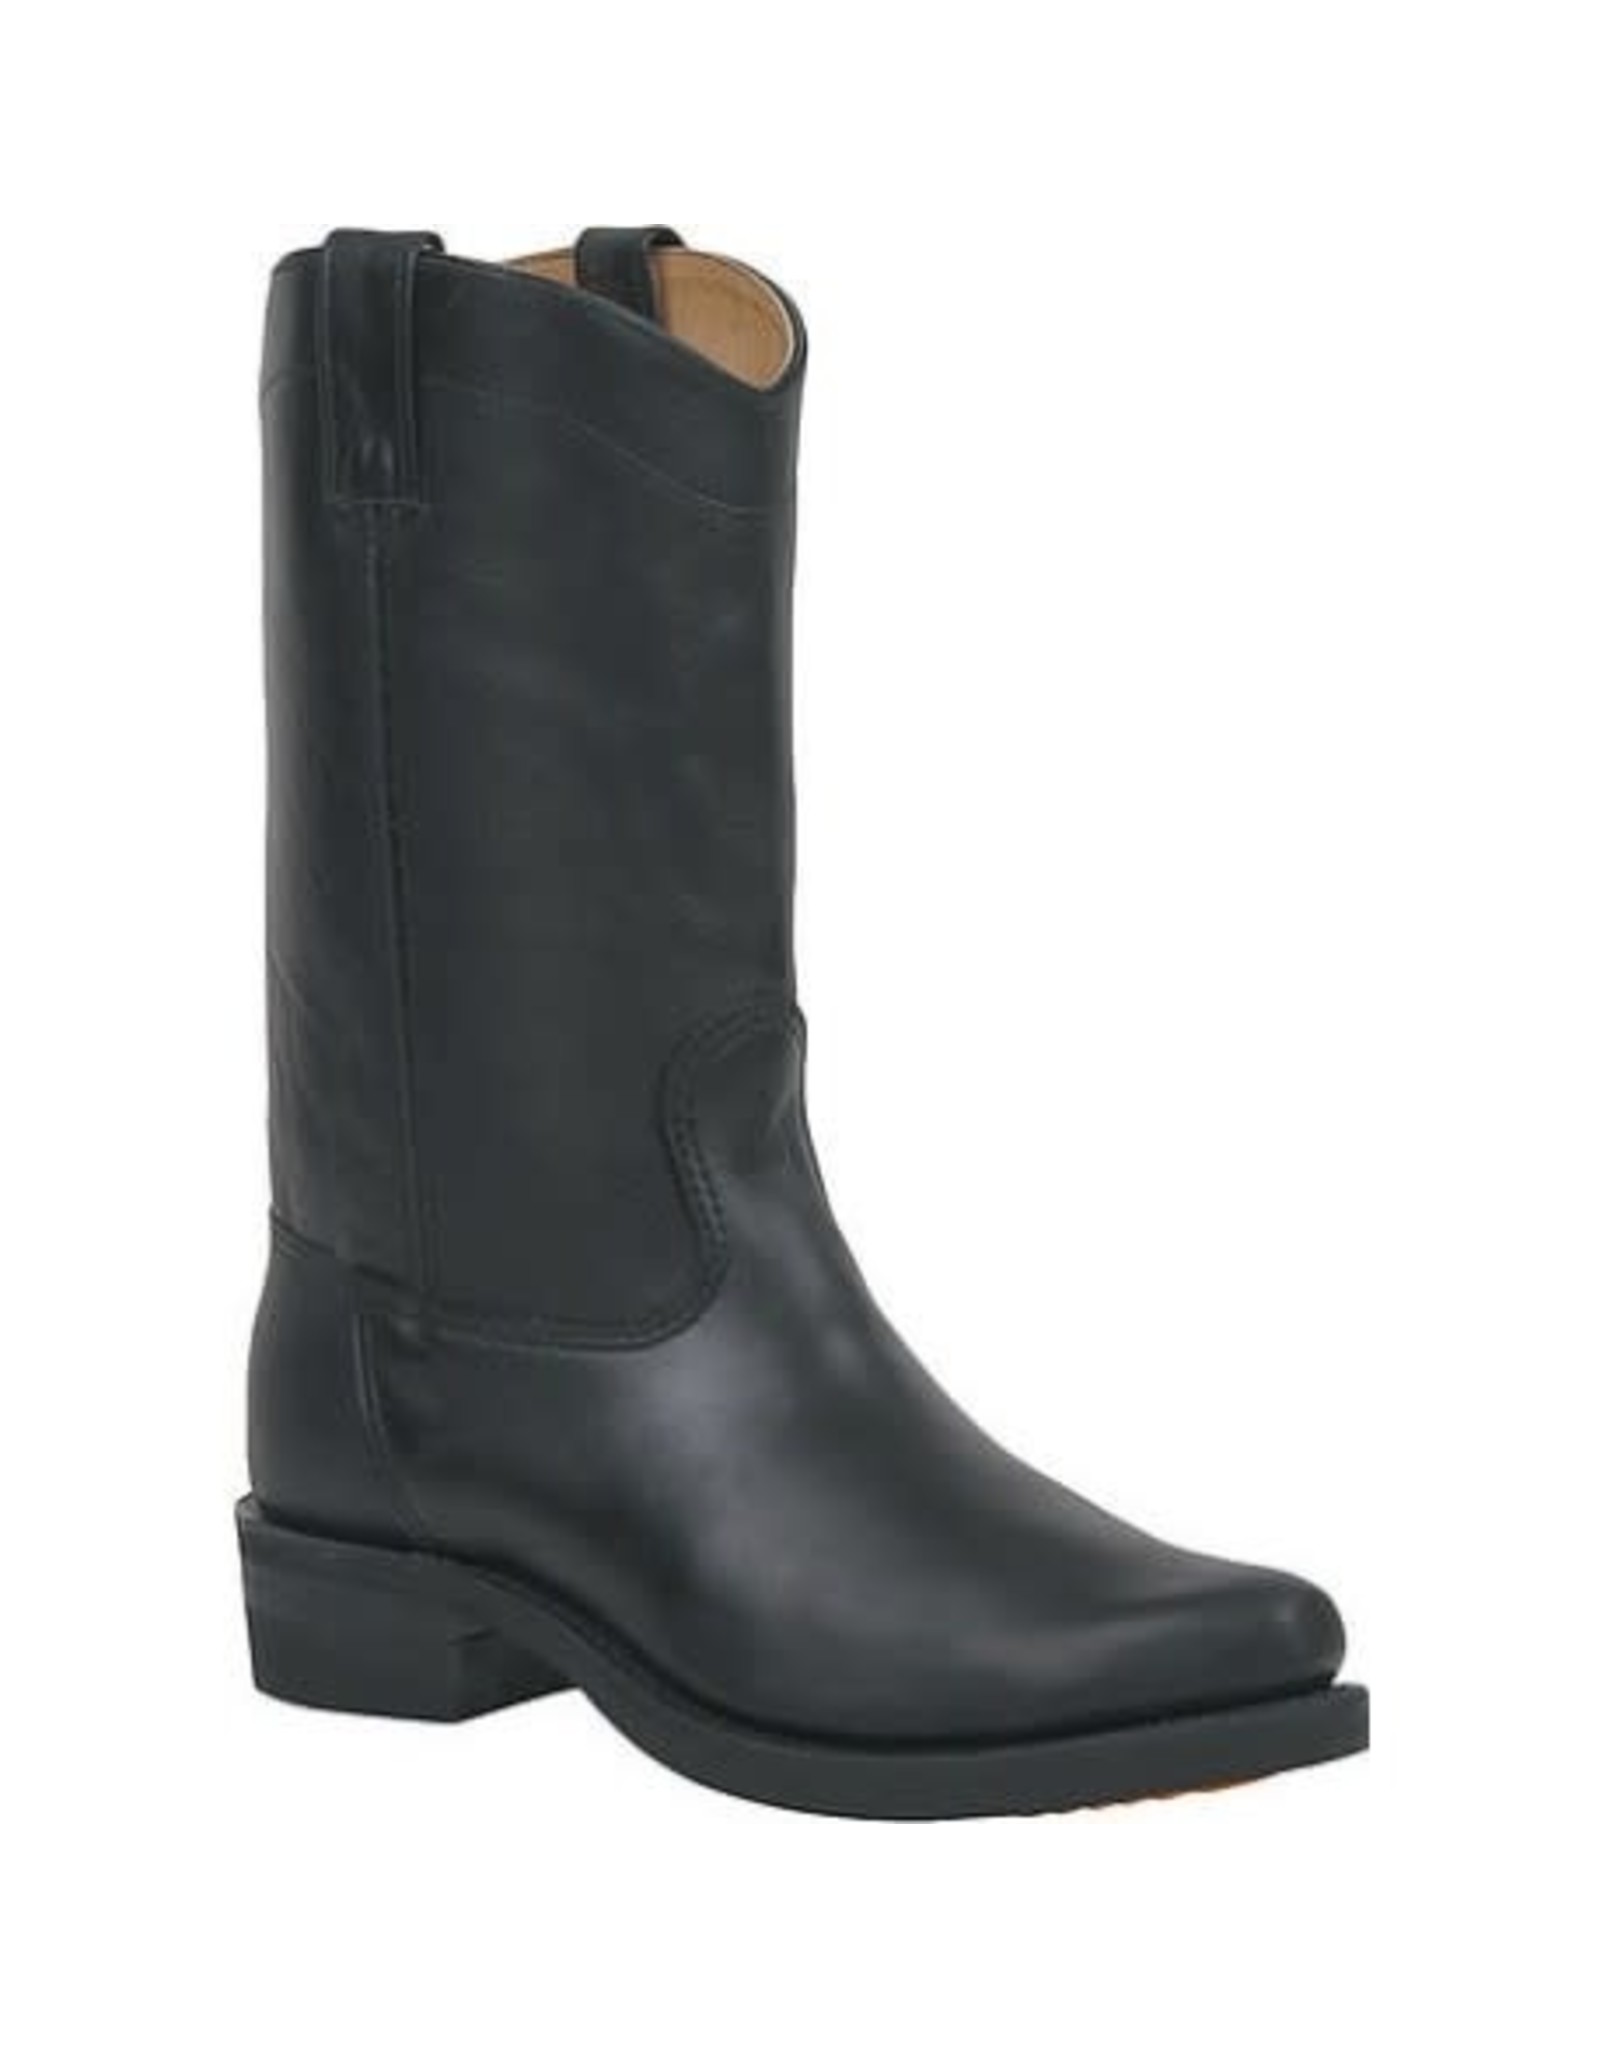 black leather boots canada